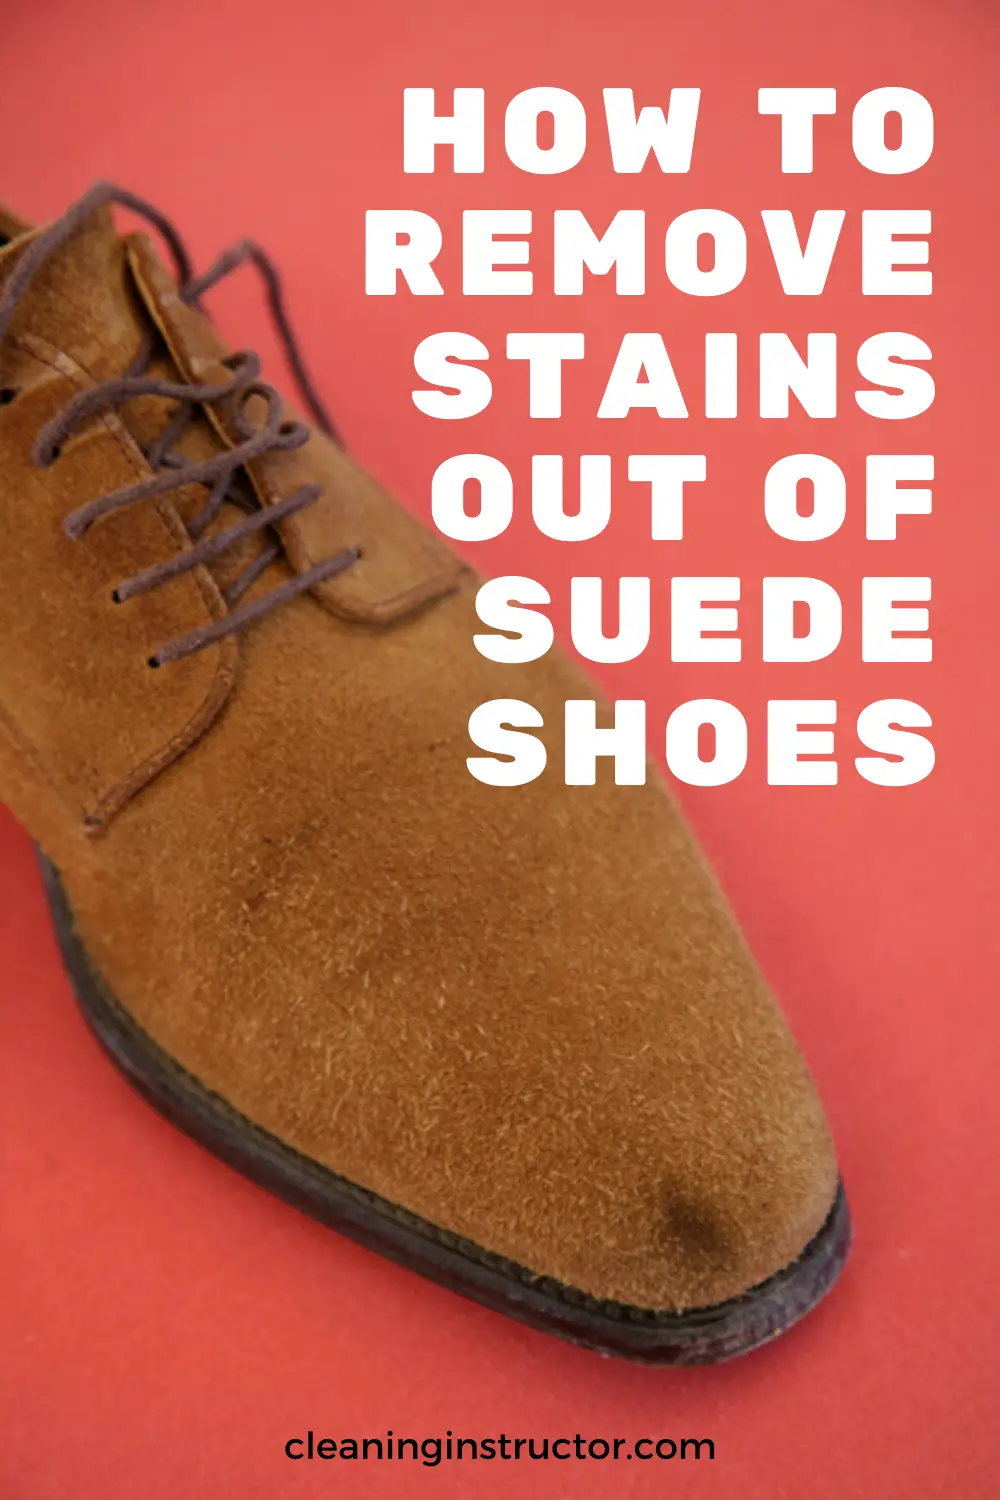 How to remove stains out of suede shoes